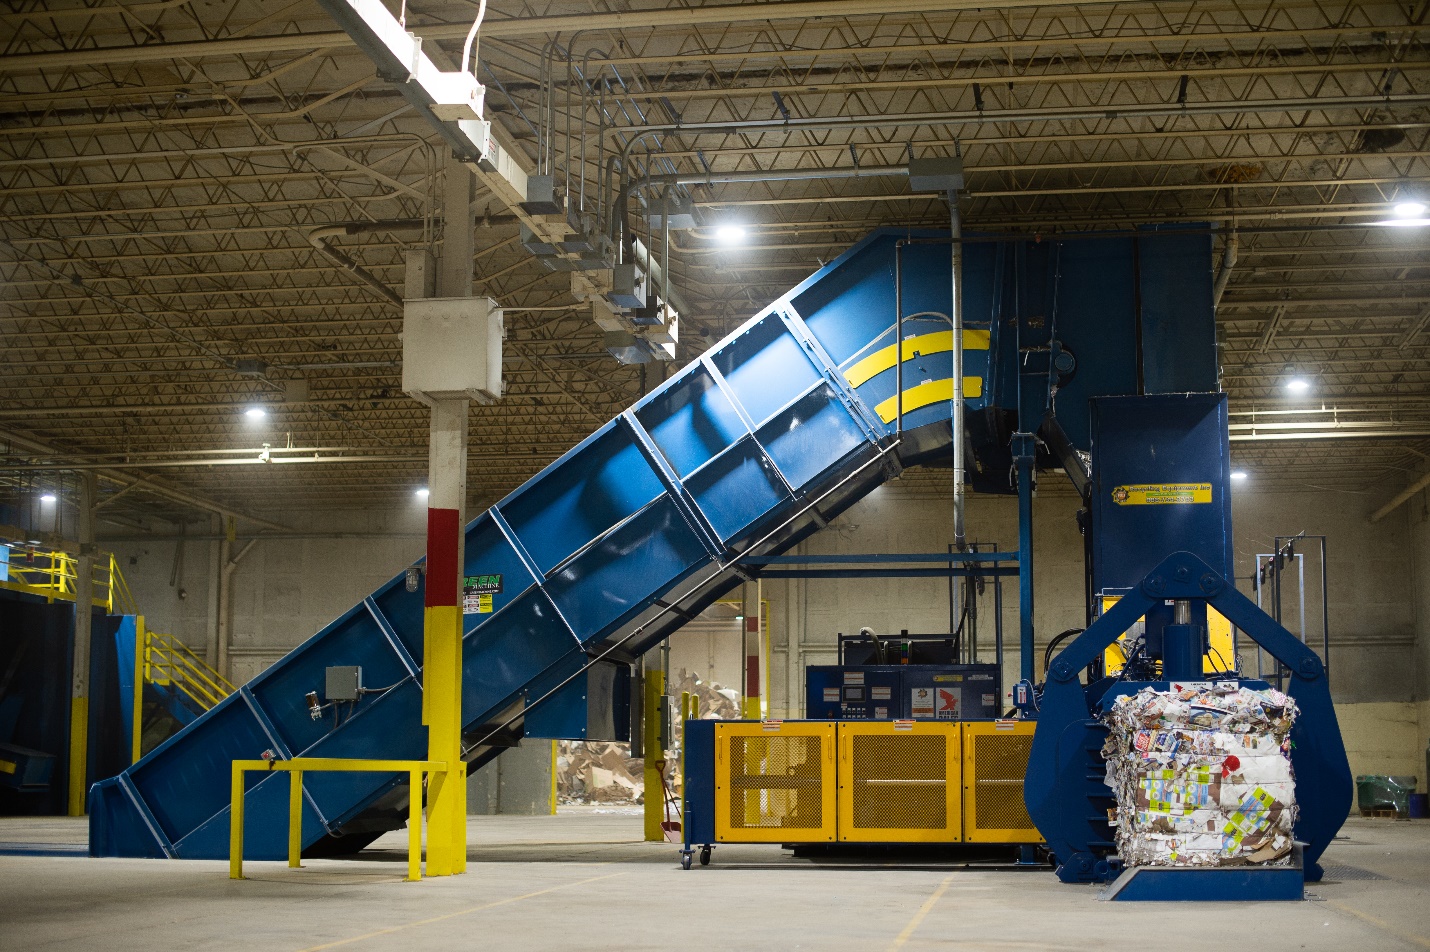 A large blue conveyor belt in a warehouse.